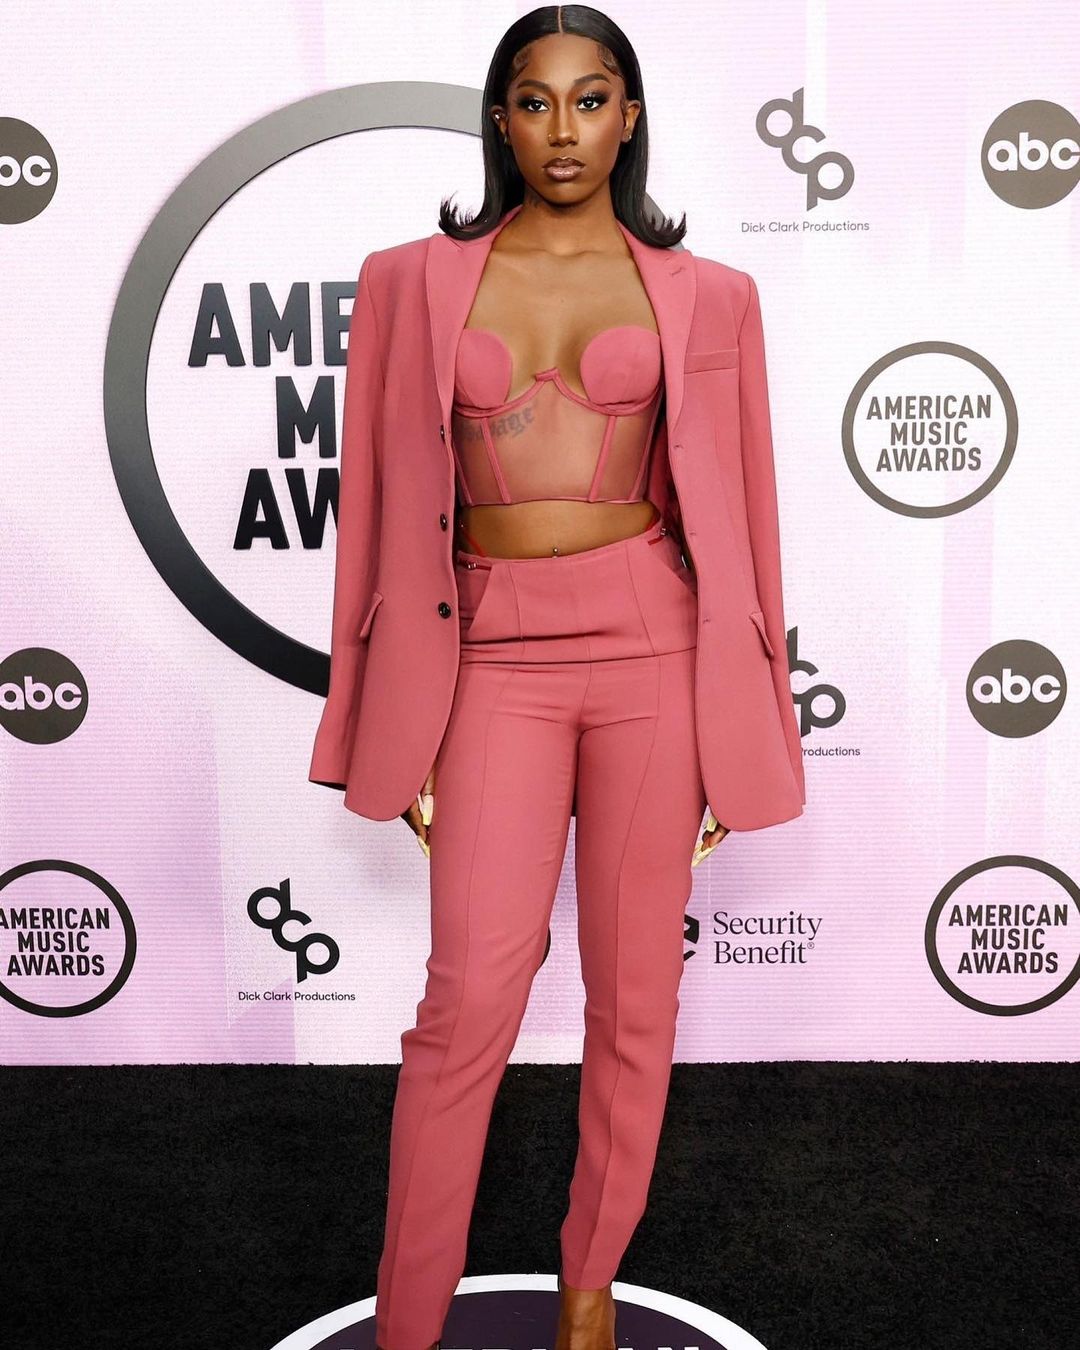 American Music Awards 2022: Kelly Rowland Wows in Animal Print Dress